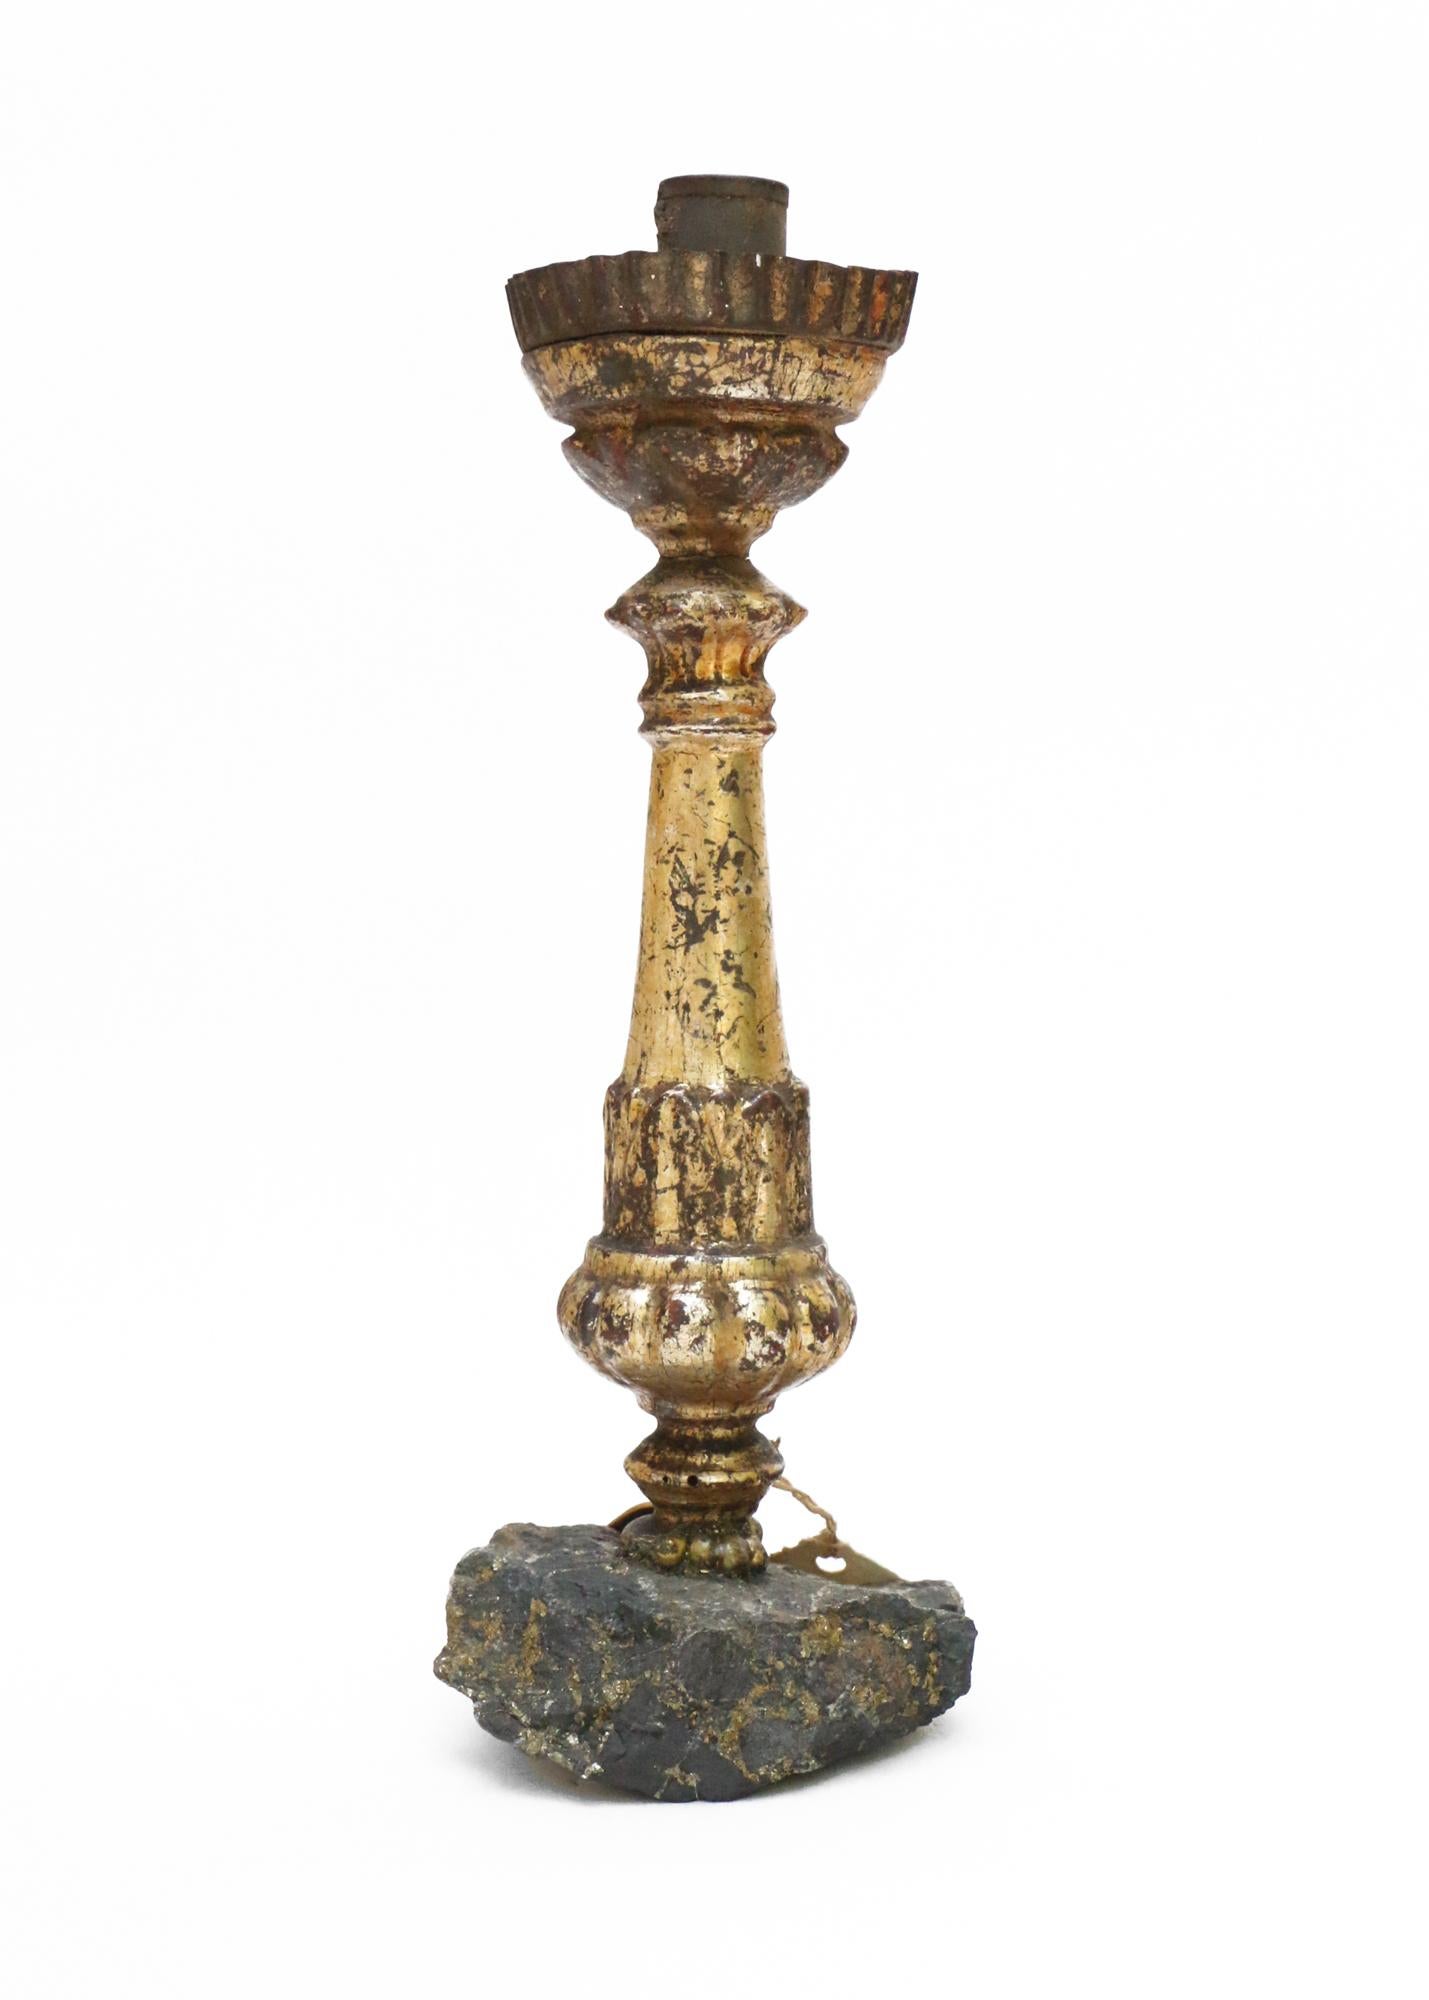 Sculptural 18th century Italian candlestick mounted on chalcopyrite and adorned with baroque pearls.

This fragment was originally part of a candlestick from a historical church in Italy. It is distressed from time but still has the original gold